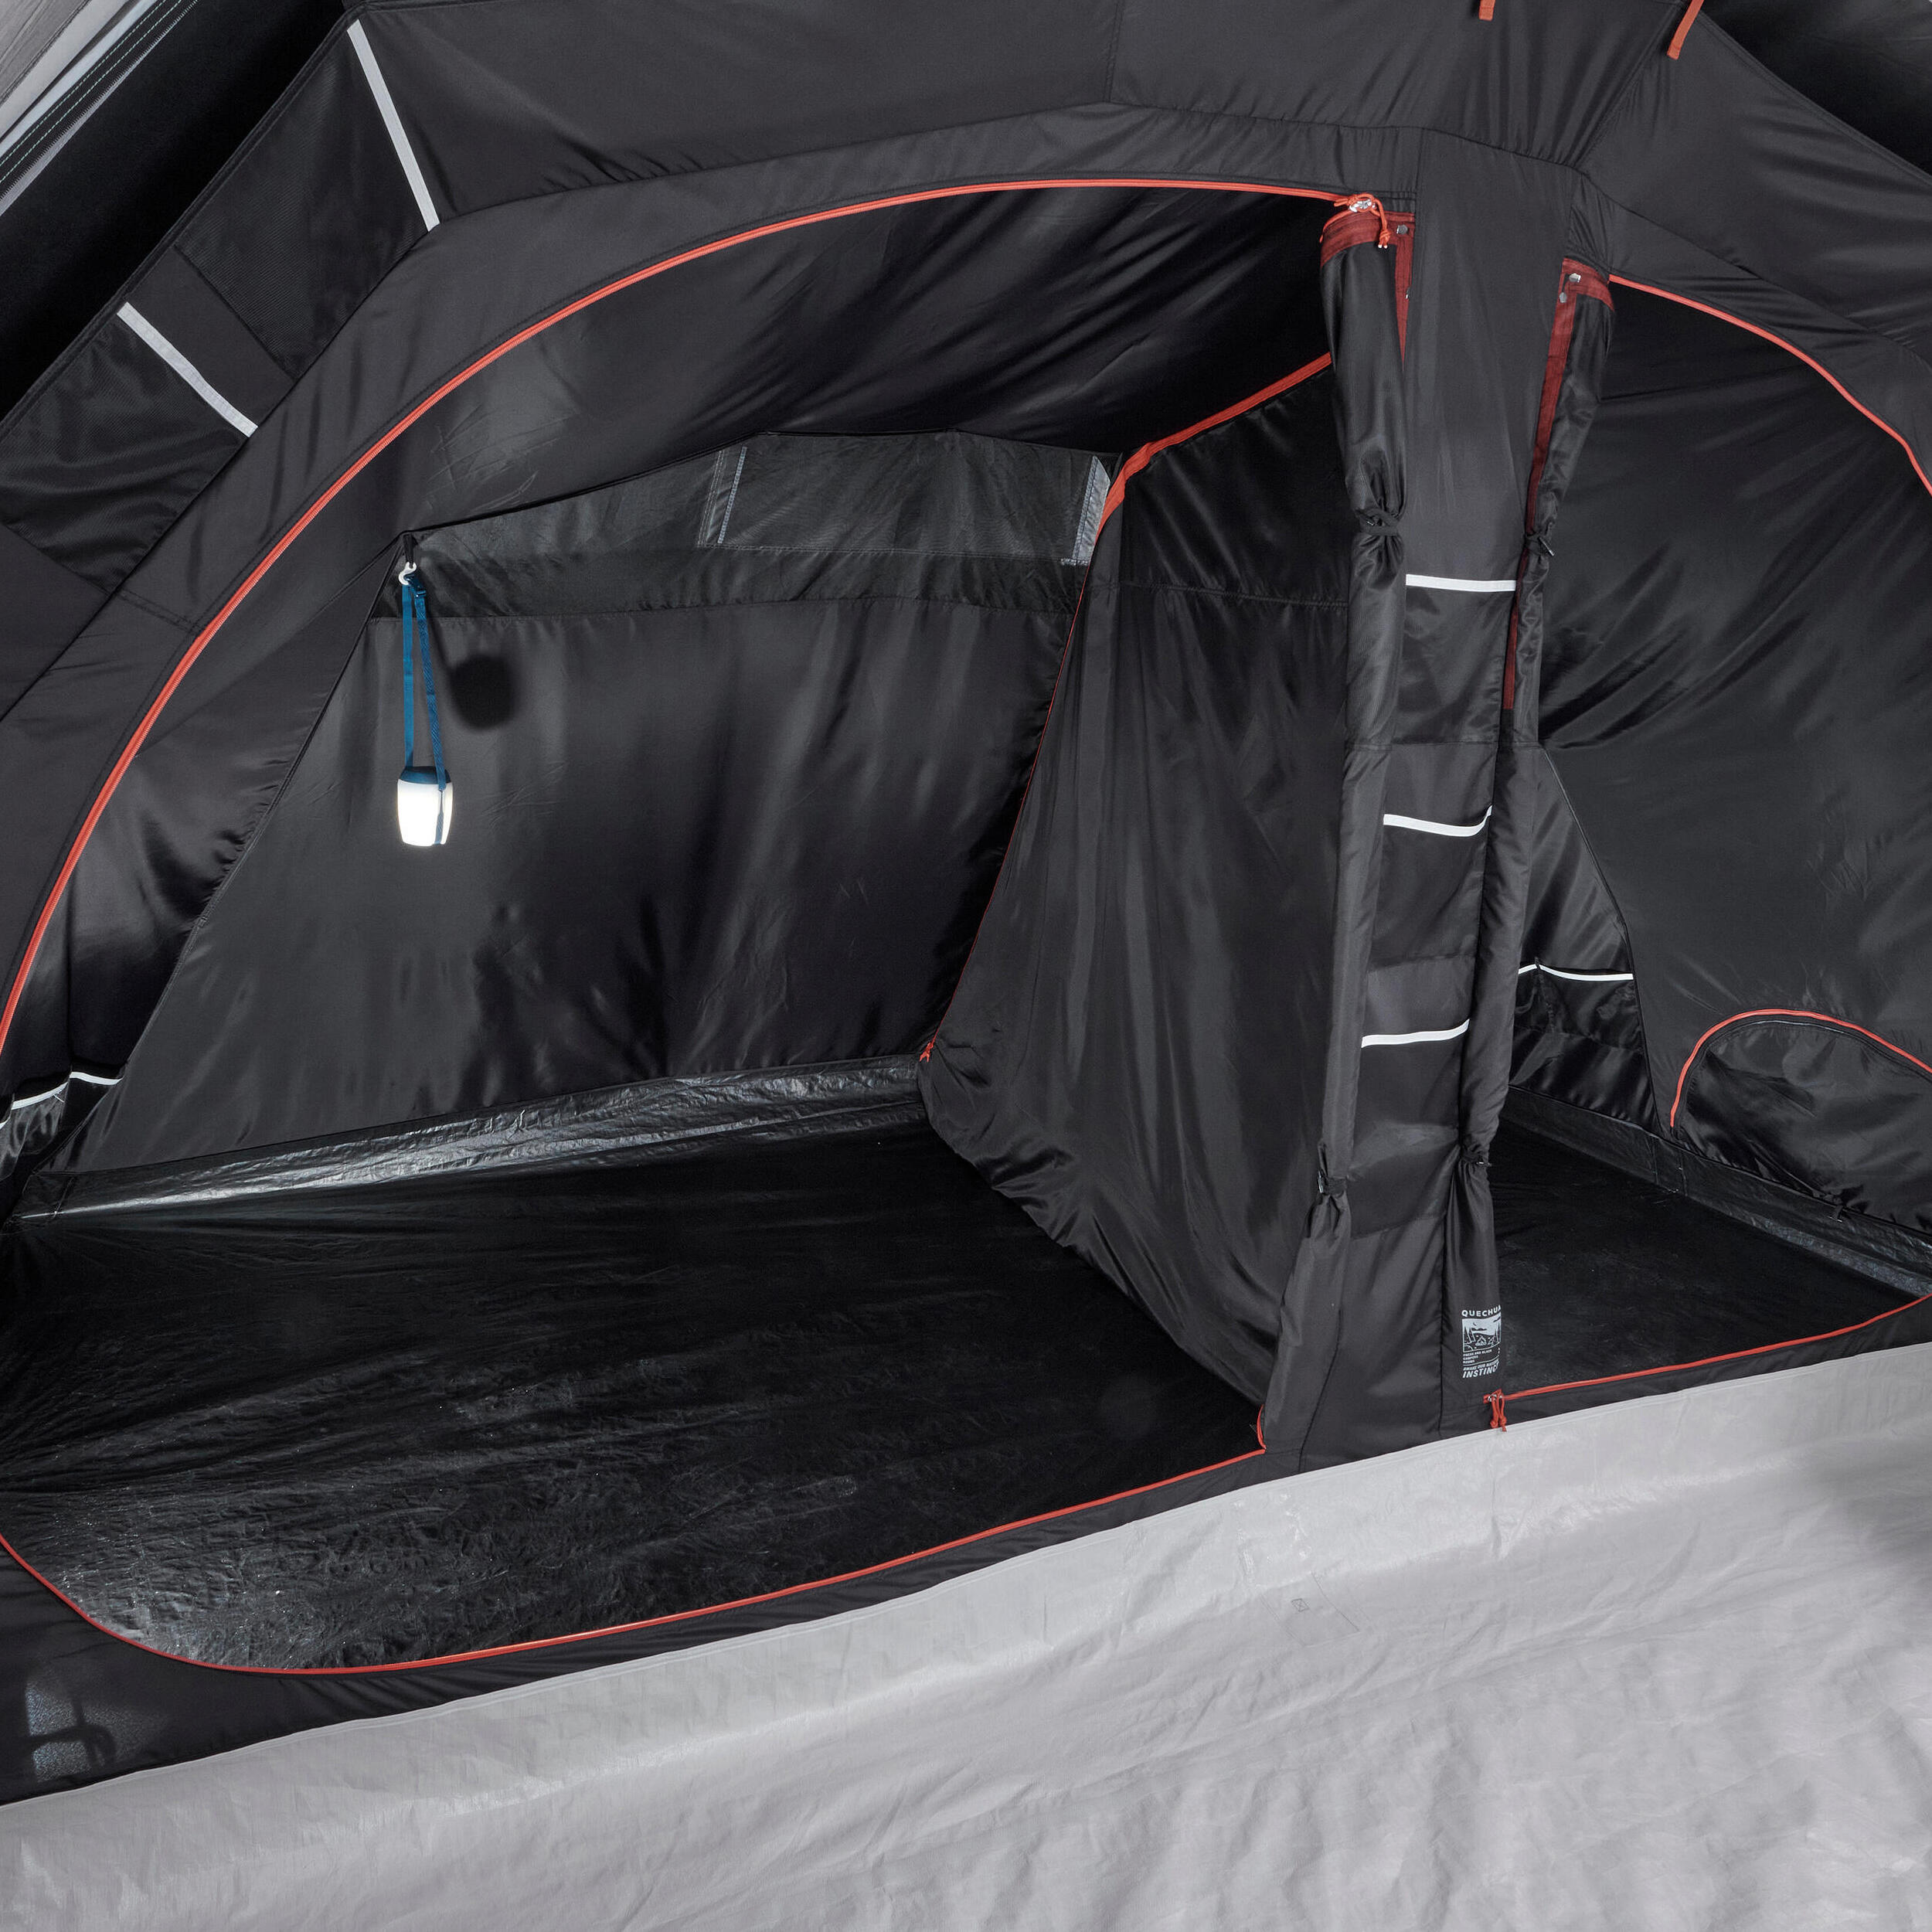 Quechua Bedroom - Replacement Part For The Air Seconds 5.2 Fresh&black Tent